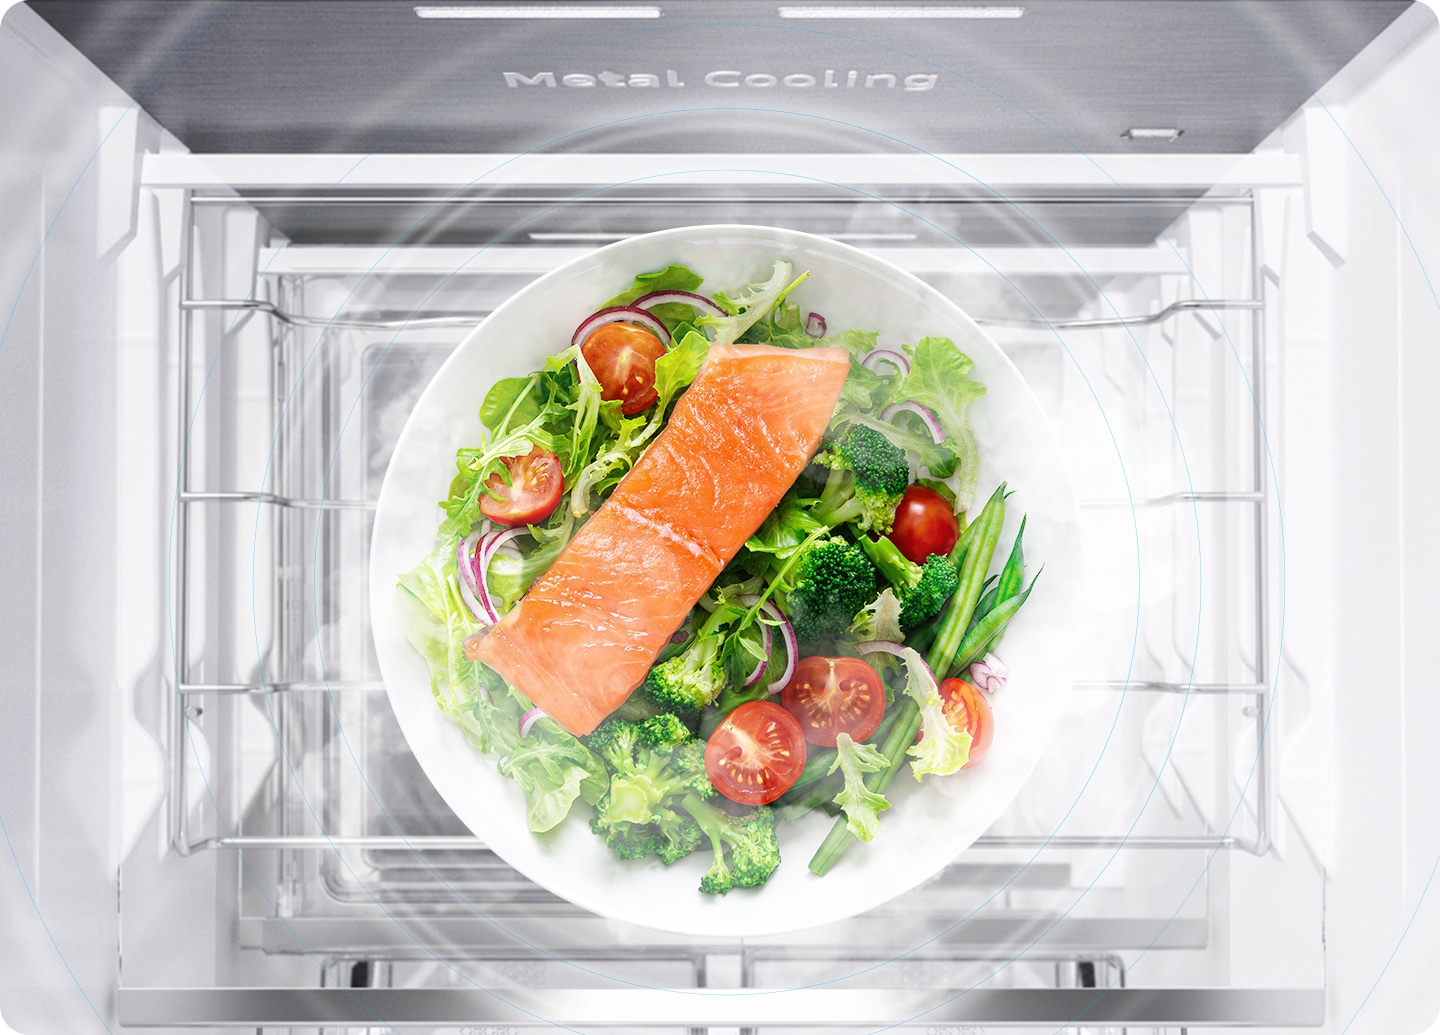 The salmon salad is on the shelf inside the refrigerator, and the cold air is spreading.